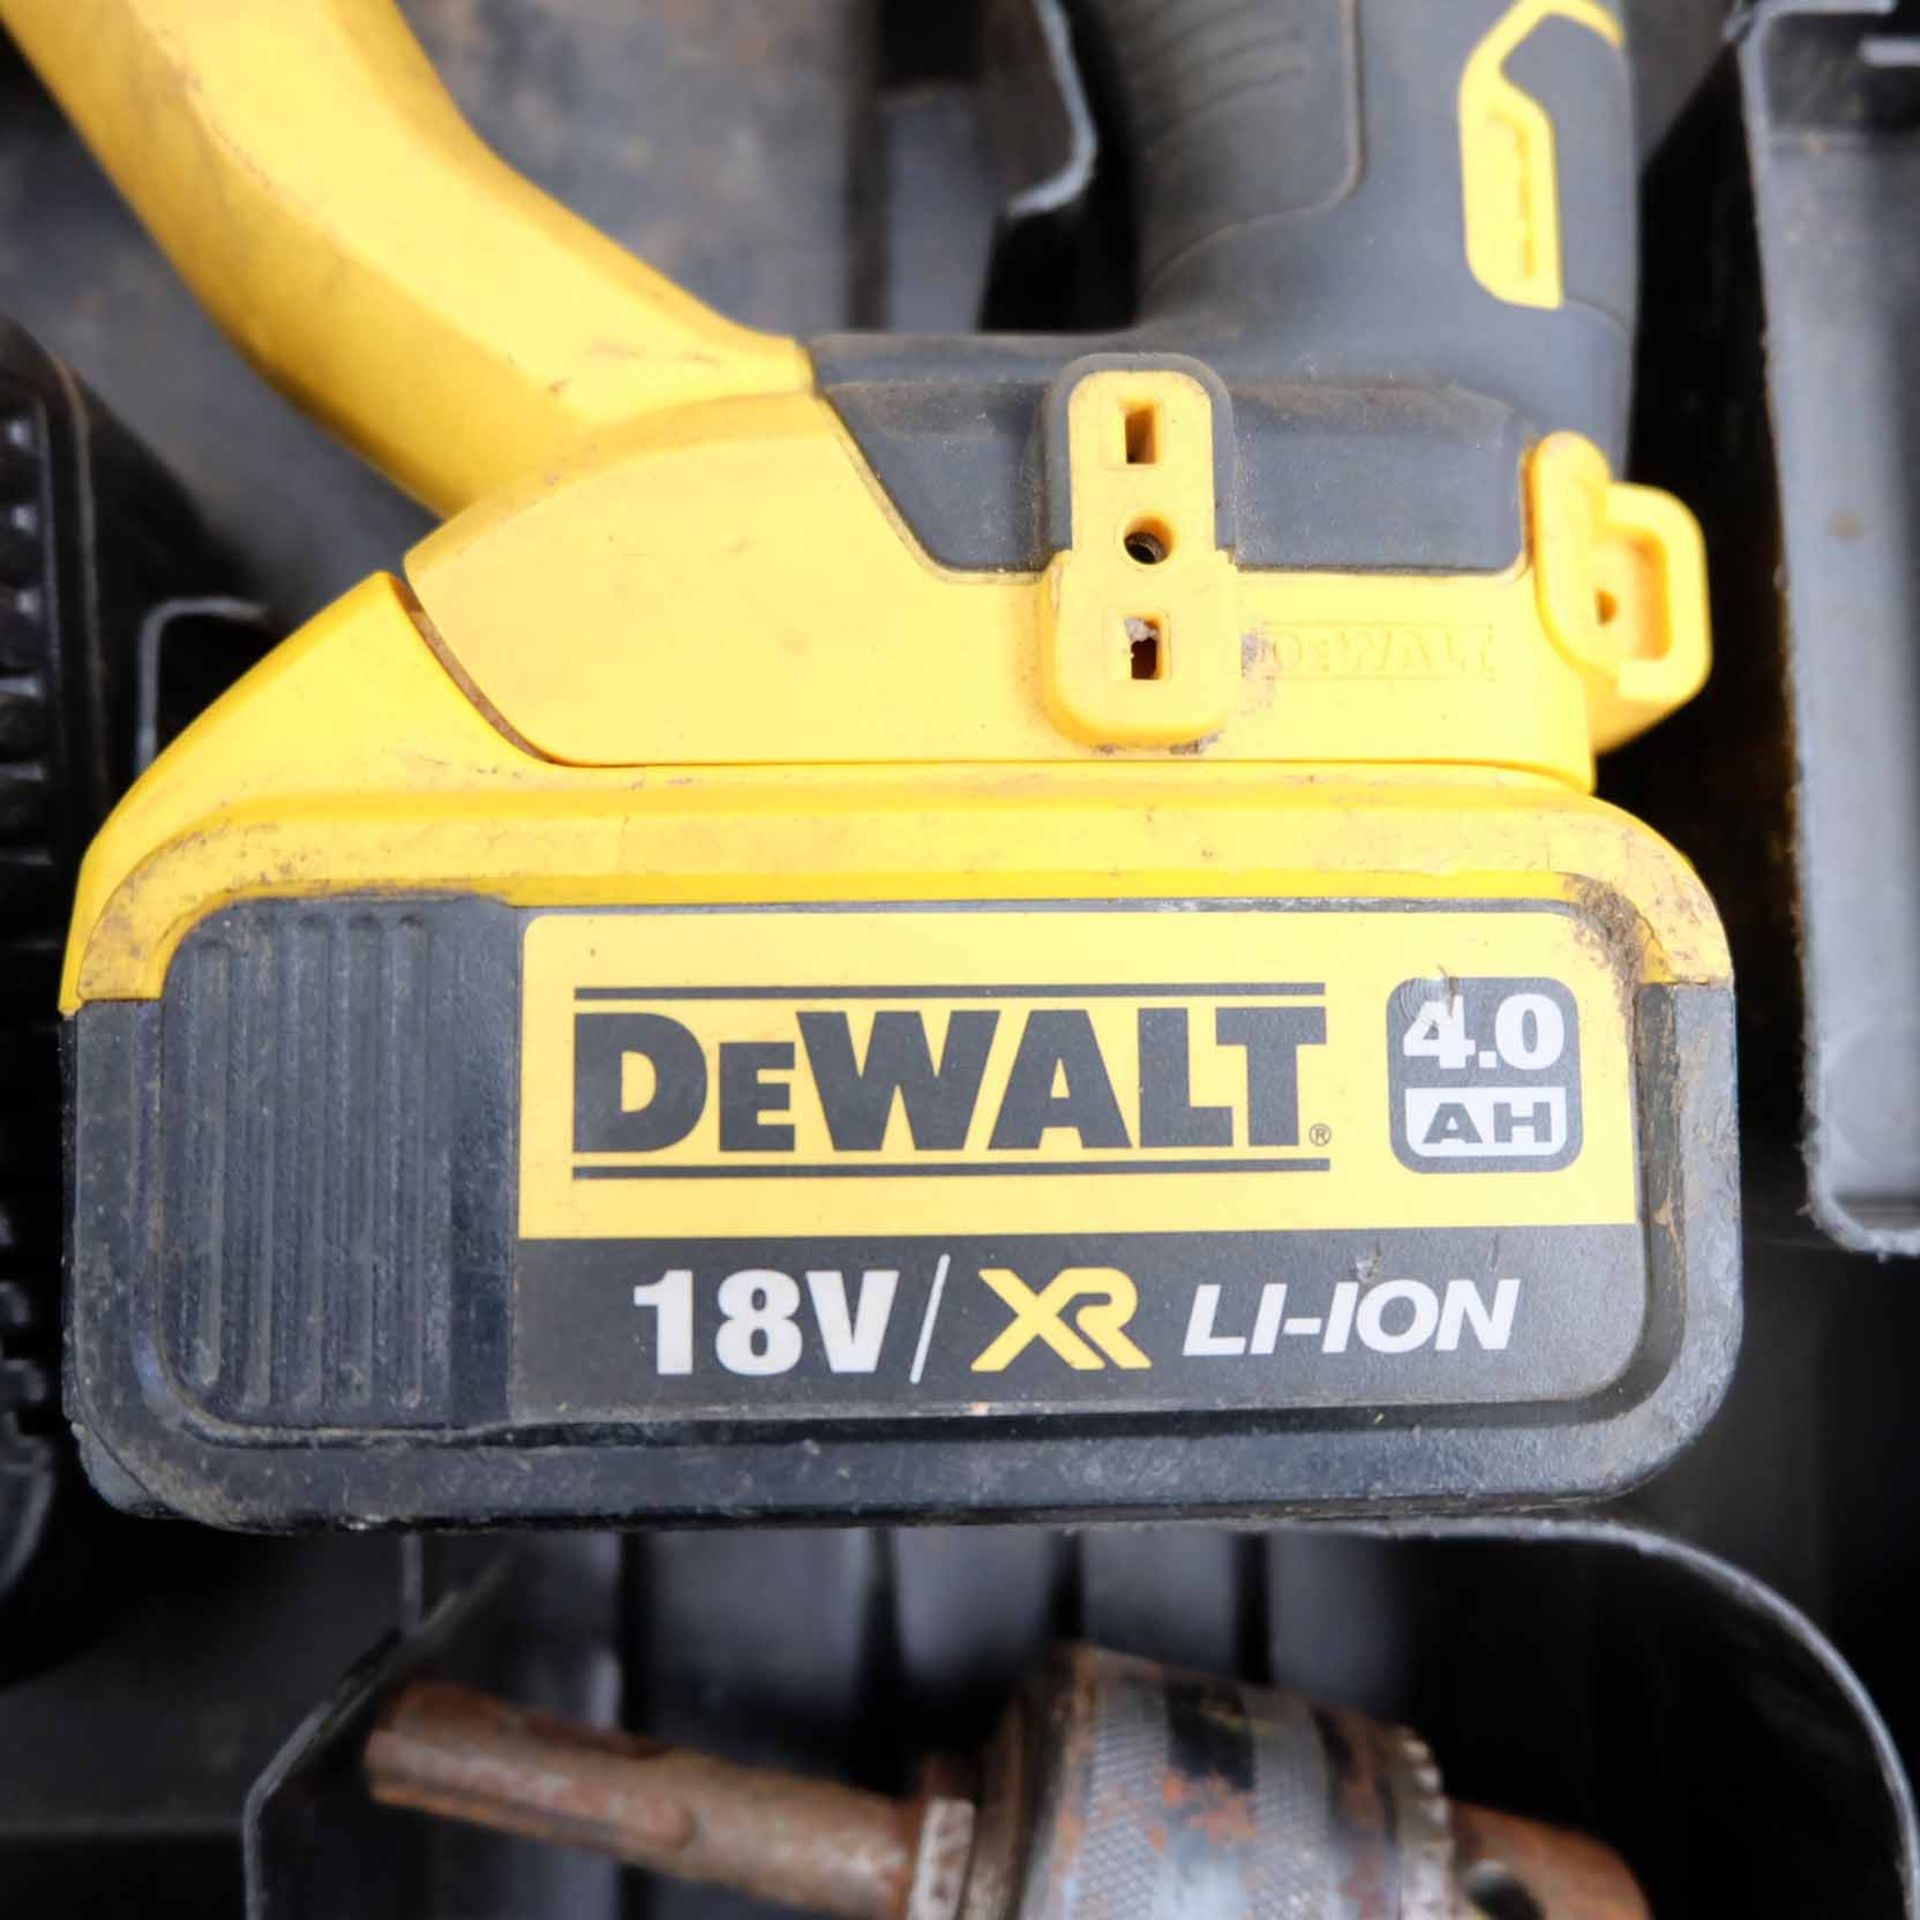 DeWalt DCH033M2 Hammer Drill. 18V Lithium Ion Battery 4.0AH. 1 x Battery. Various Drill Bits & Acces - Image 4 of 7